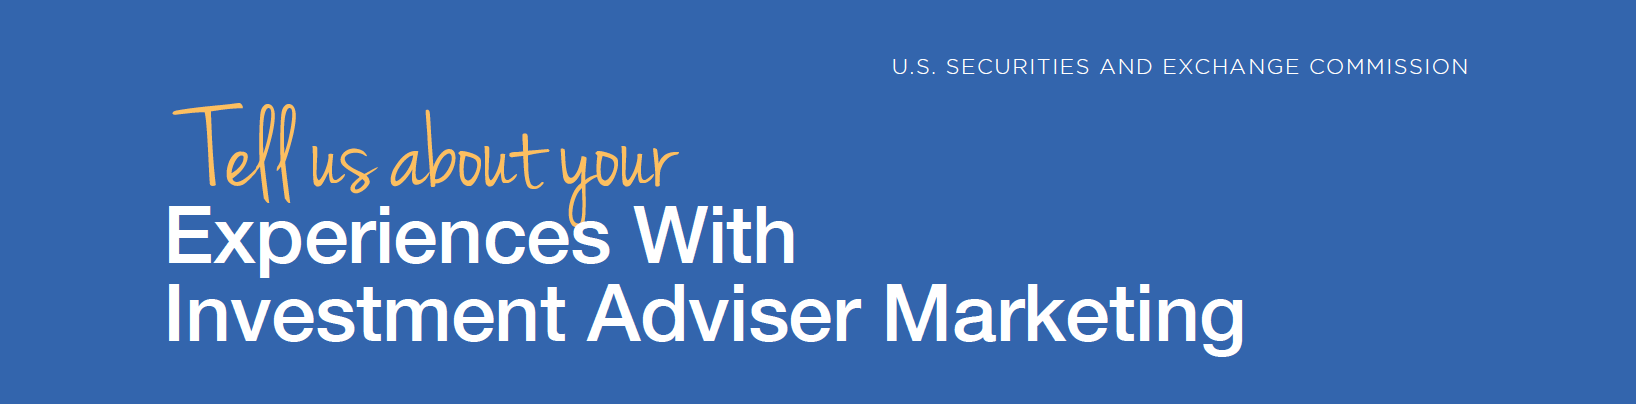 Investment Adviser Marketing, tell us about your experiences